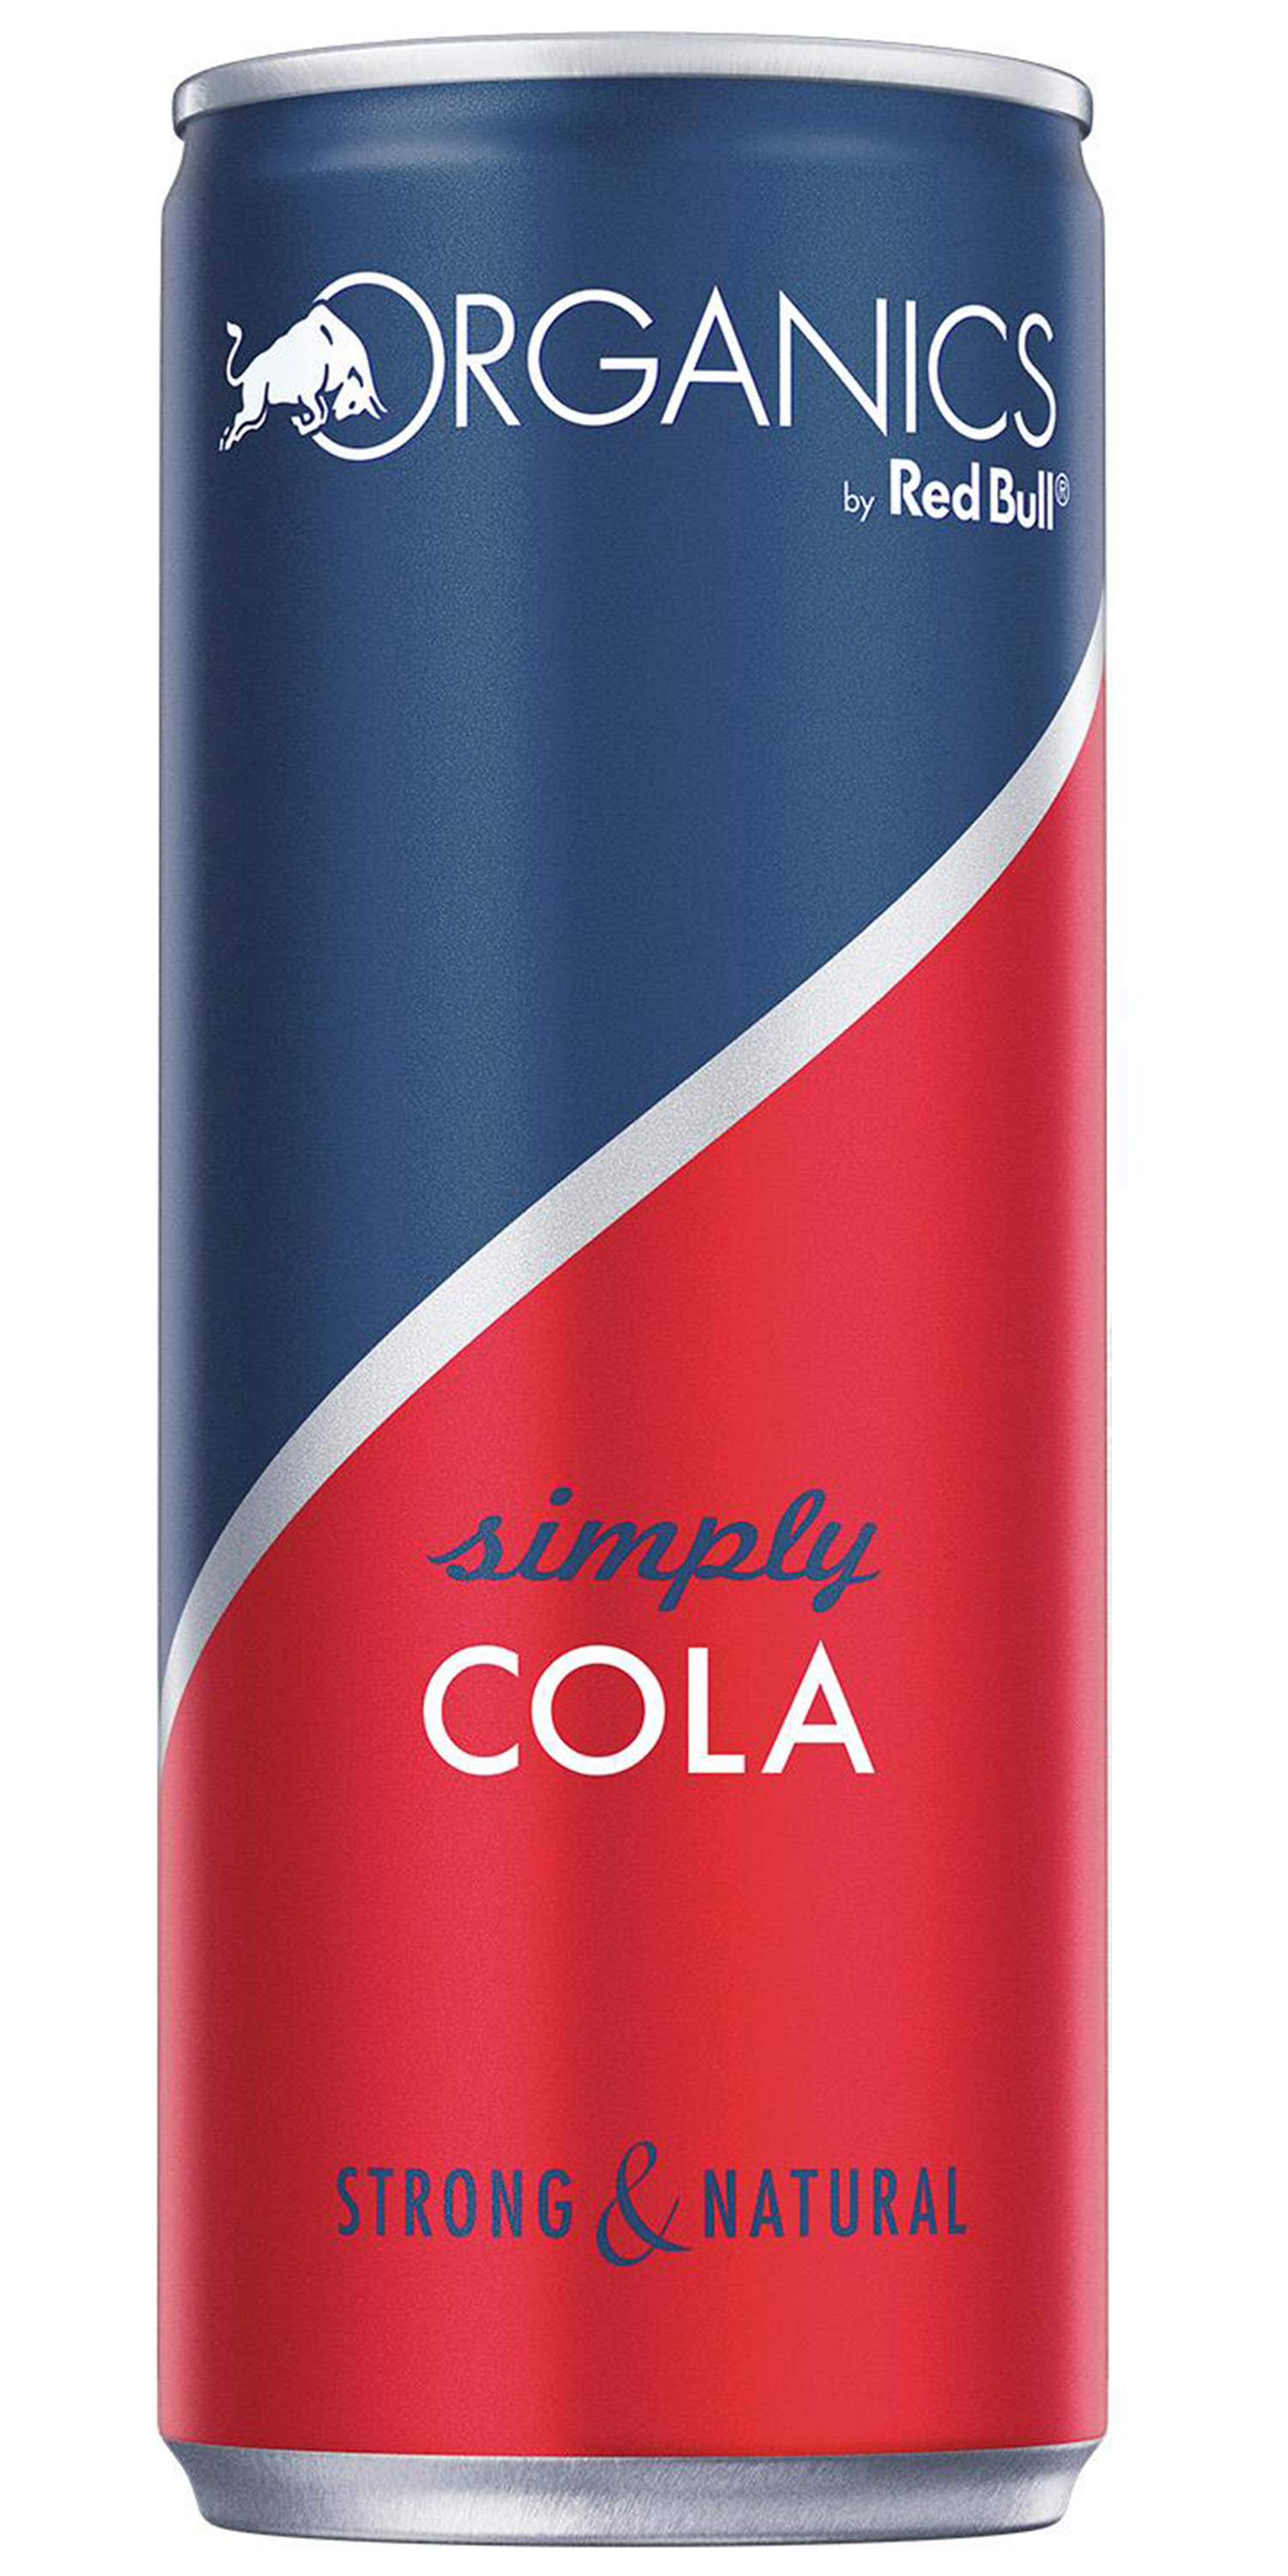 Organics Red Bull Simply Cola*  Amstein SA - Der Bierbotschafter